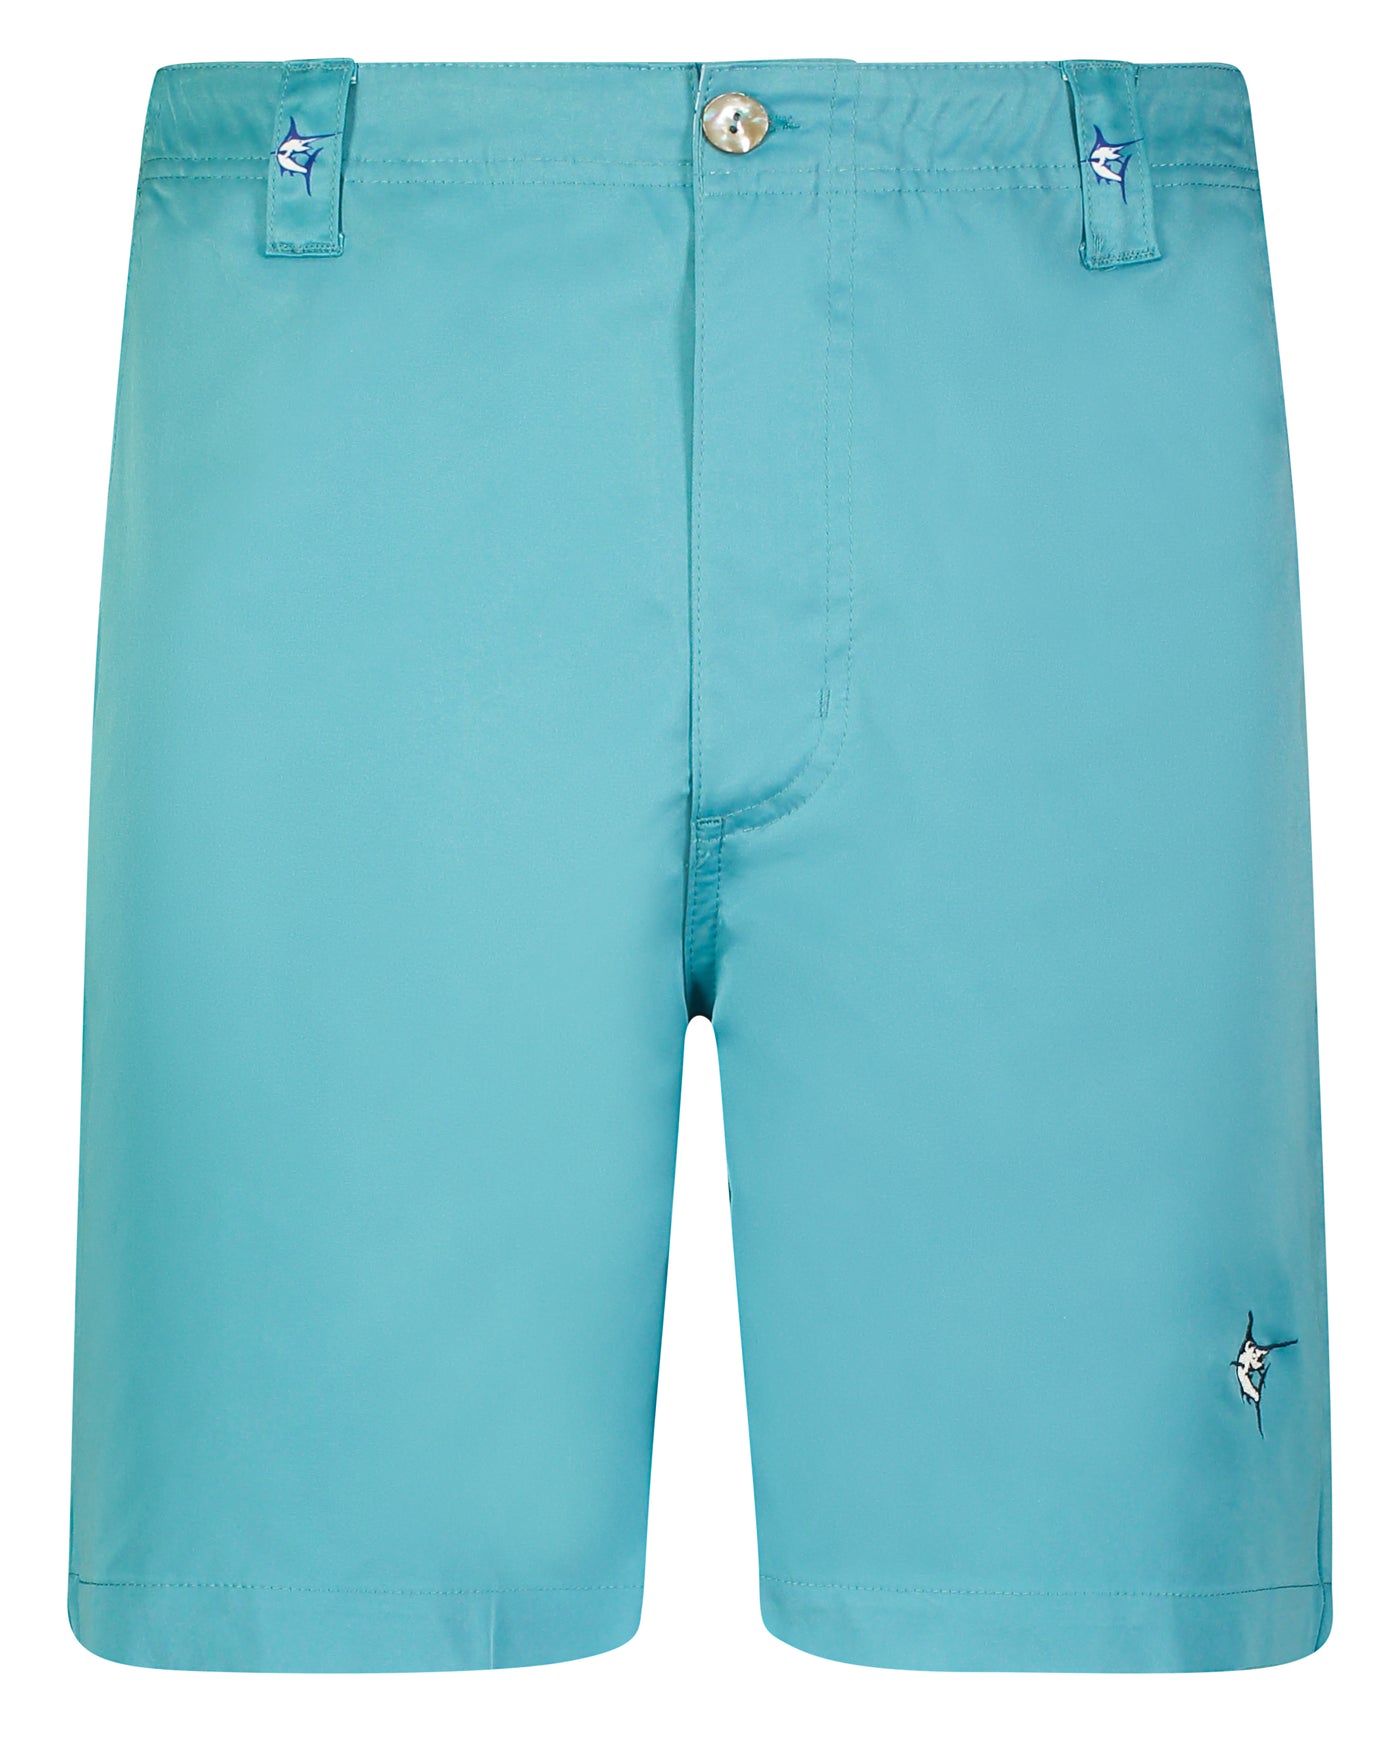 Captain Shorts Teal Light Weight Cotton Stretch – White Water Life